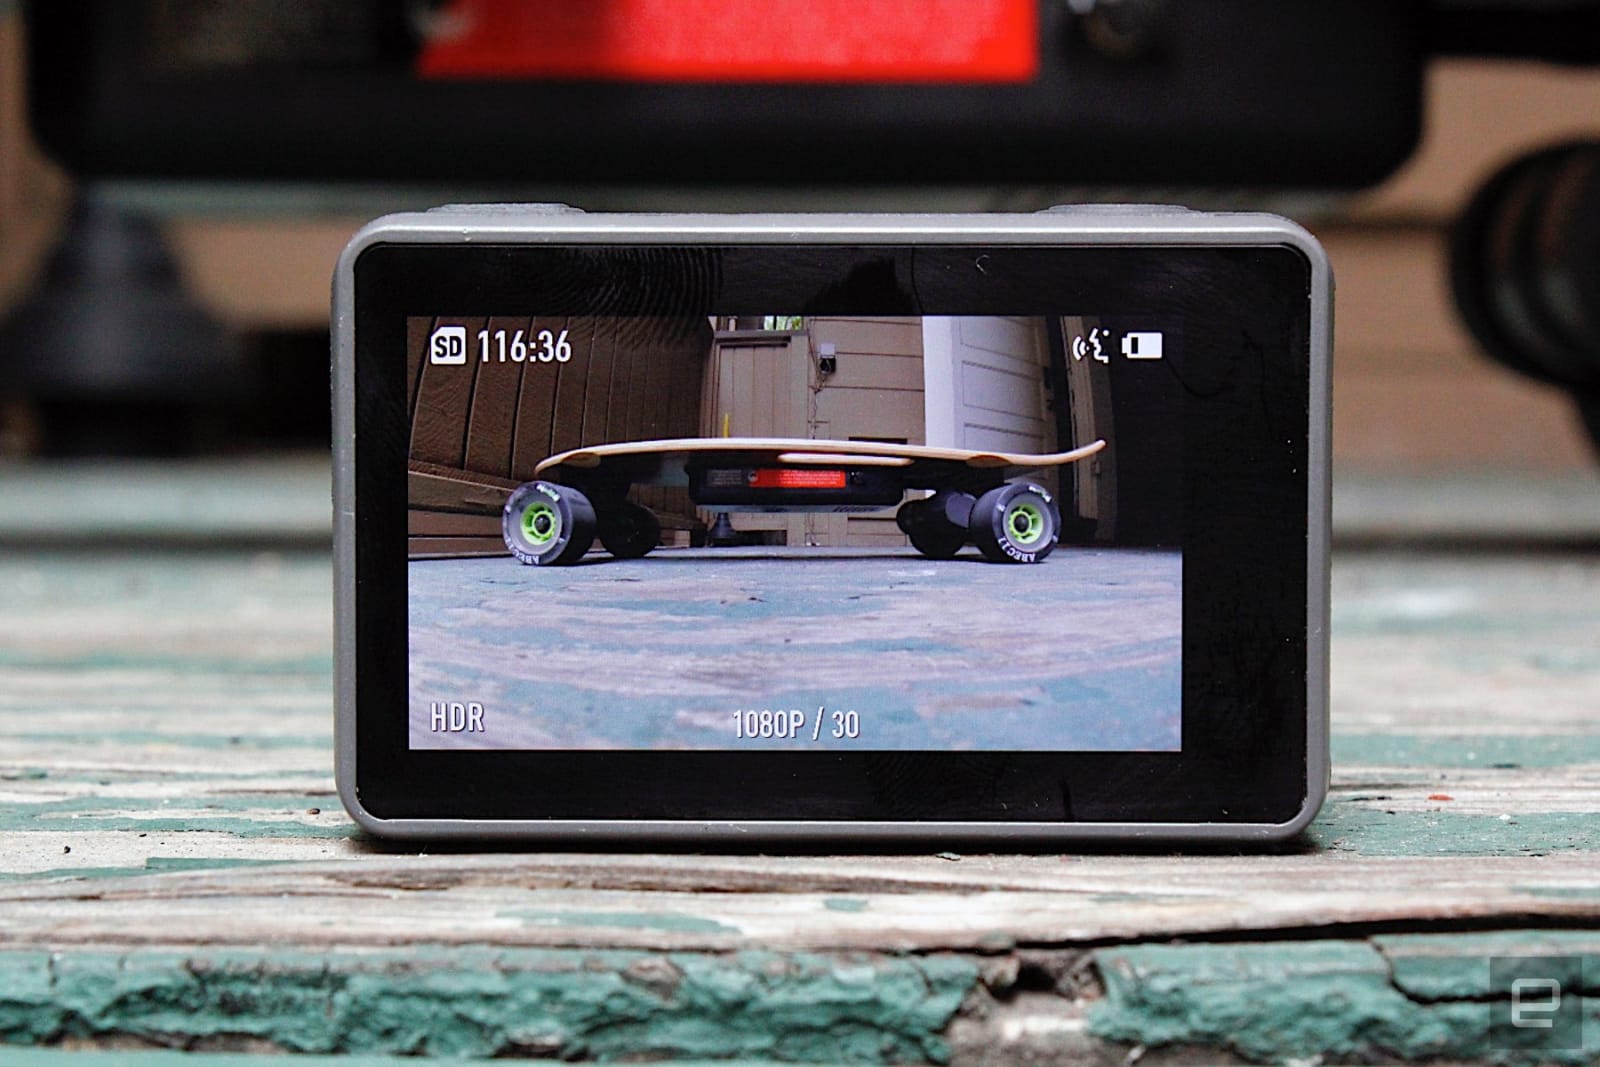 DJI Osmo Action review